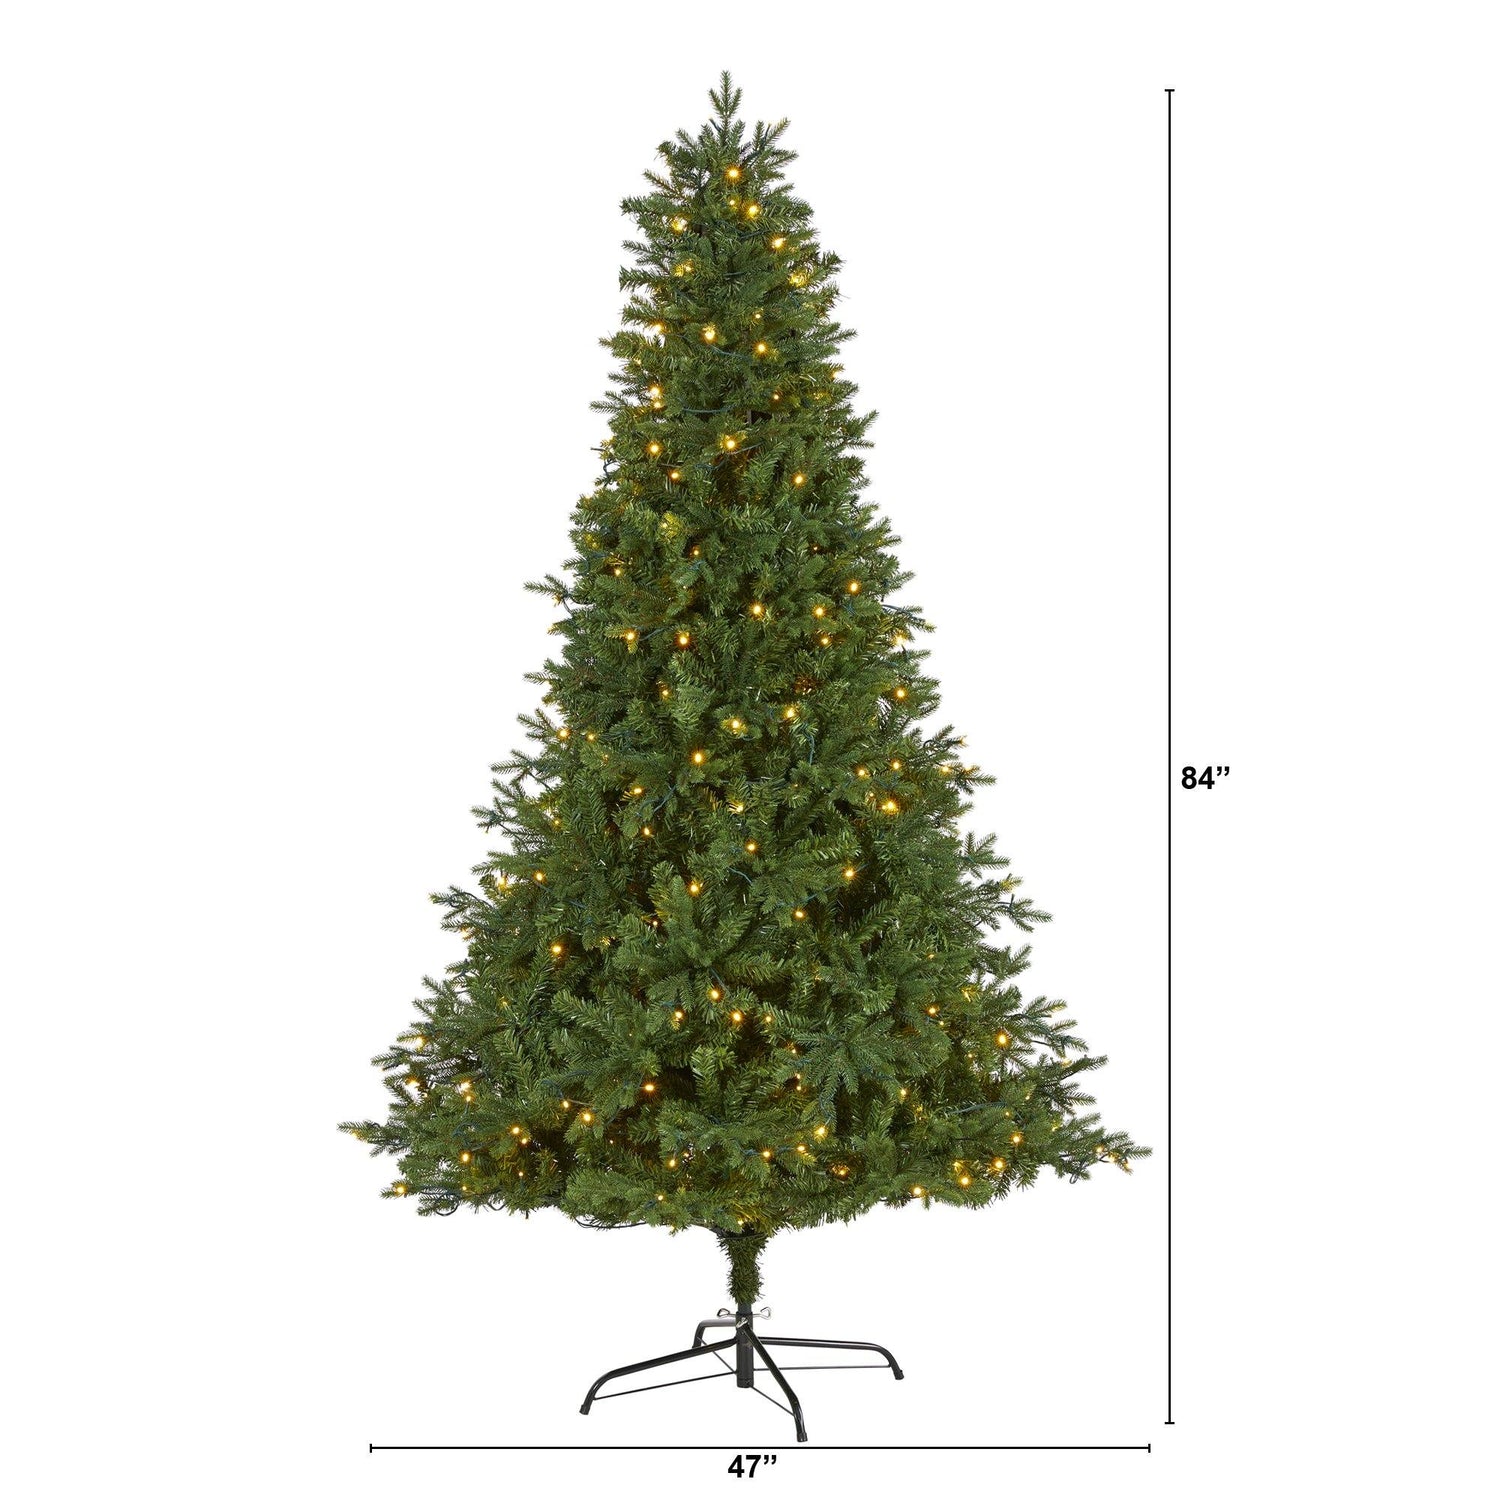 7' Vermont Fir Artificial Christmas Tree with 350 Clear LED Lights